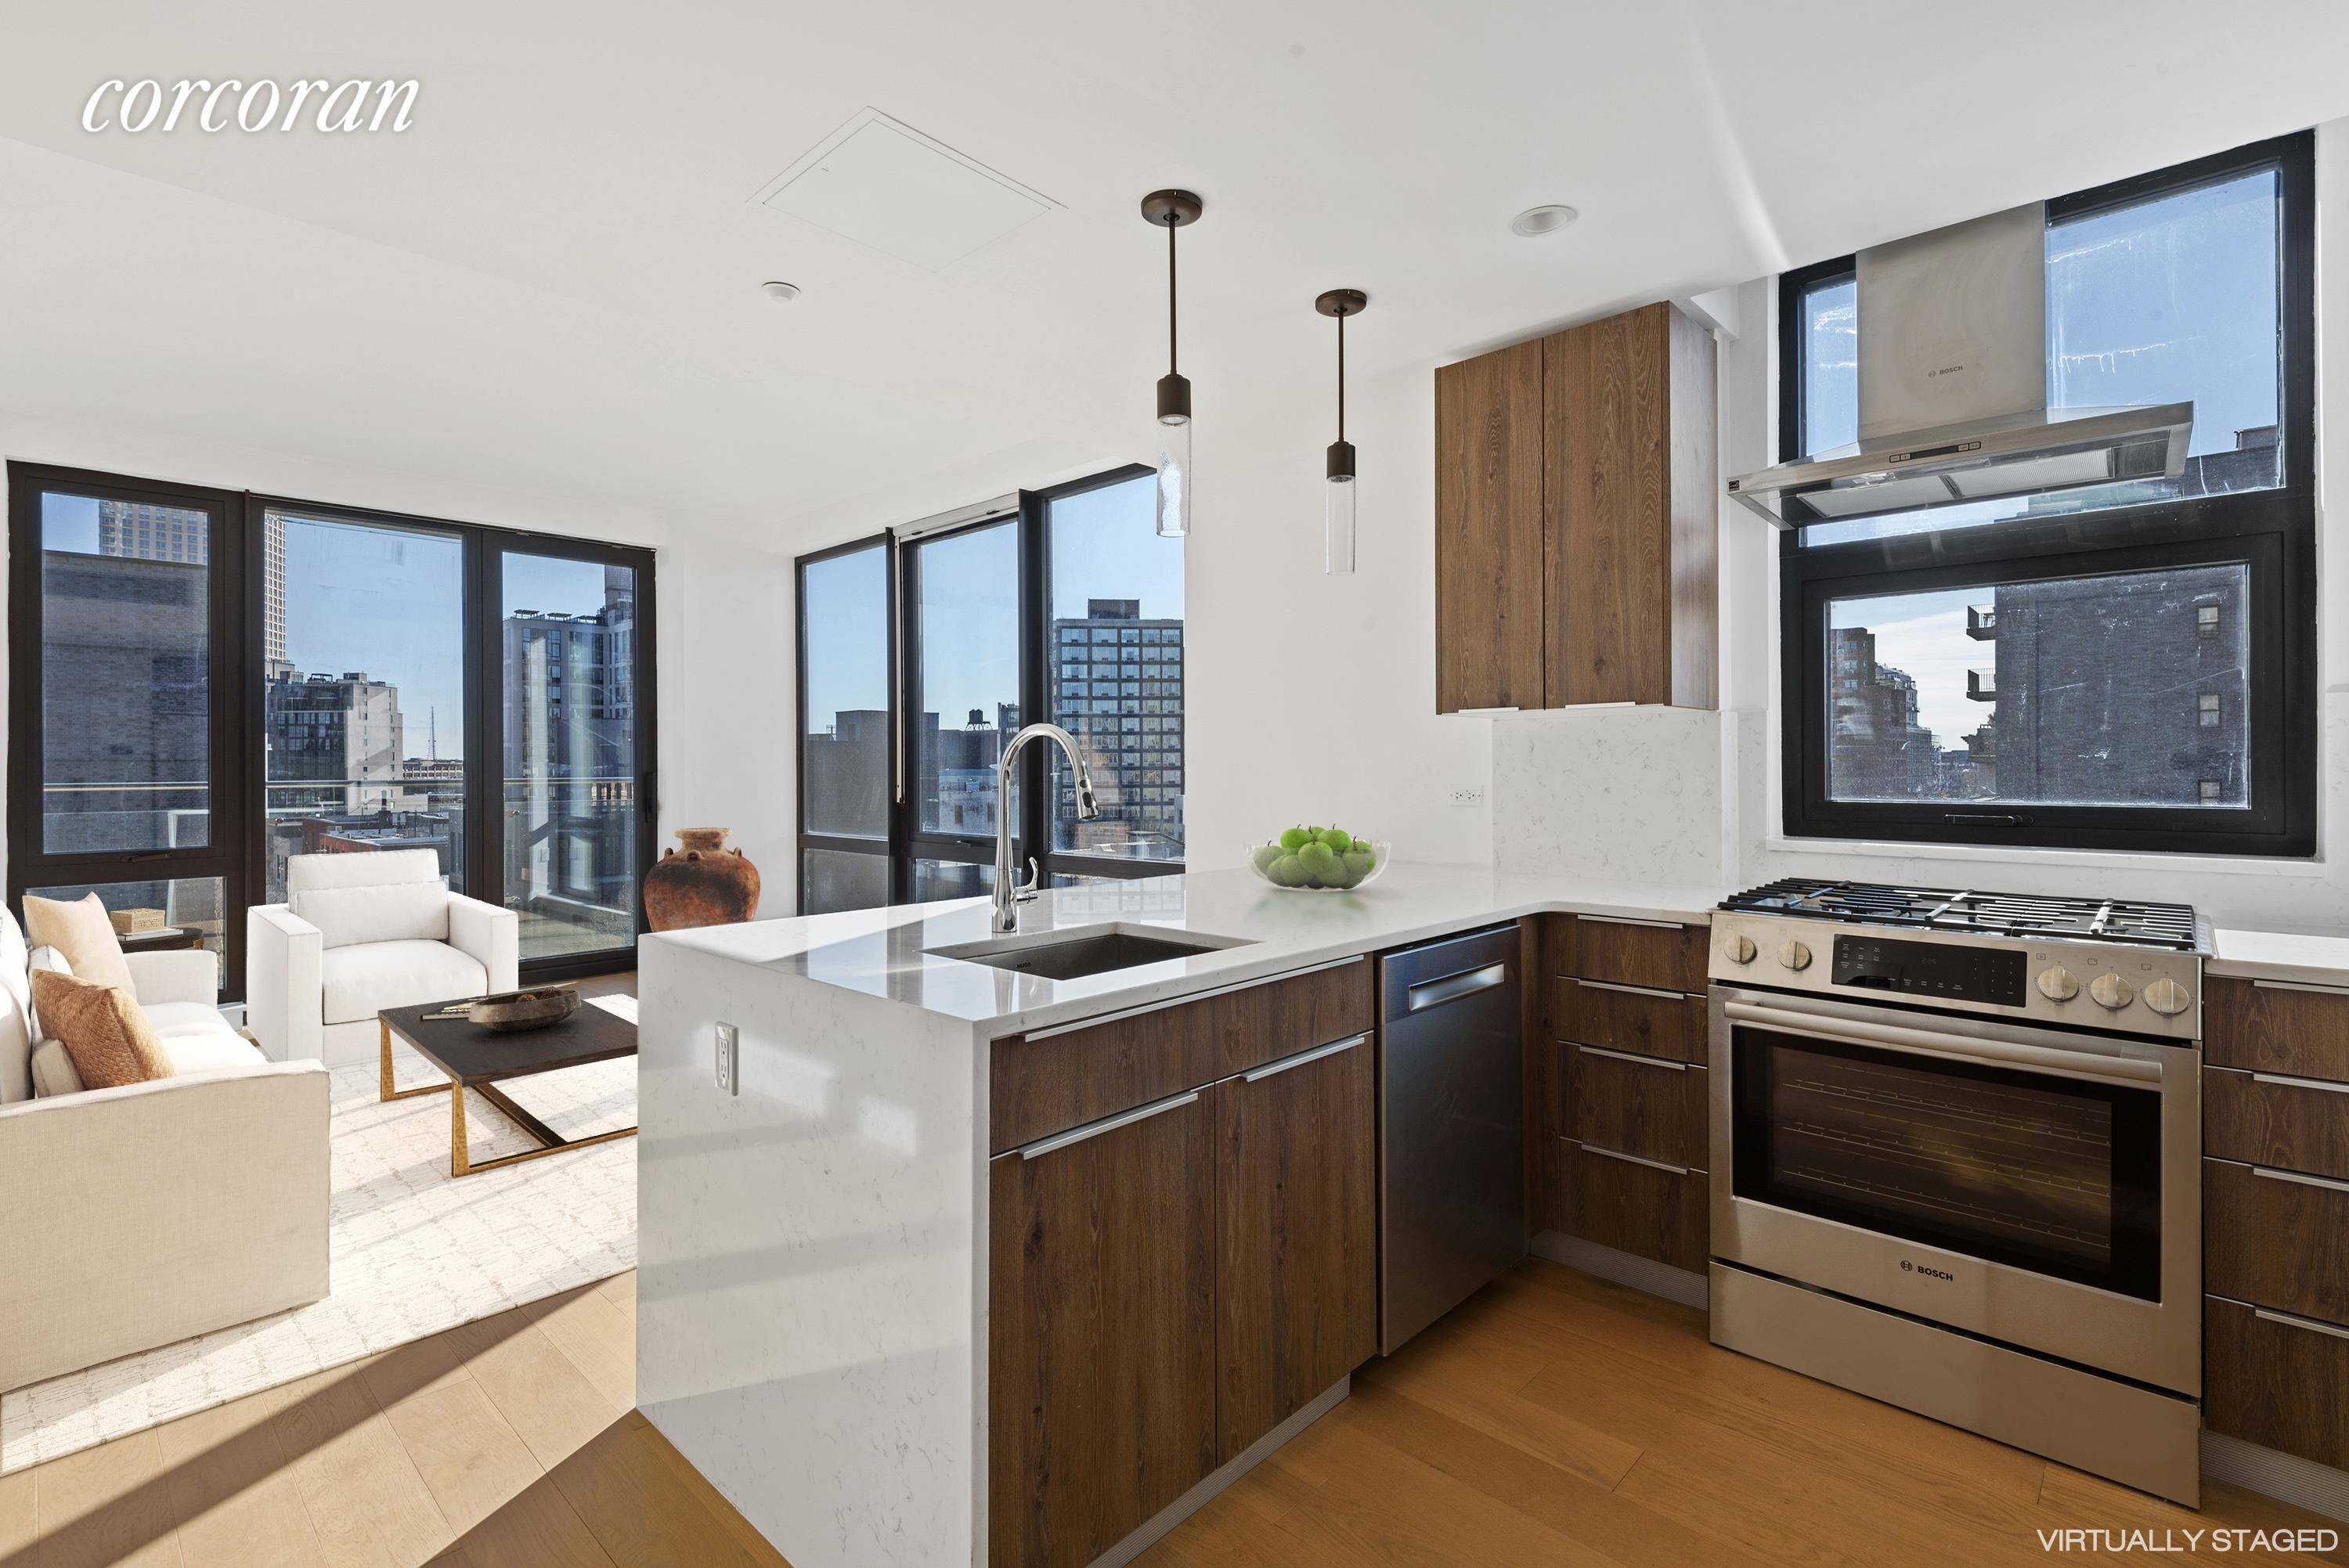 Residence 5D at The Bond, Long Island City, is a coveted south and east facing corner one bedroom, one bath unit with 650 interior square feet and a large balcony.